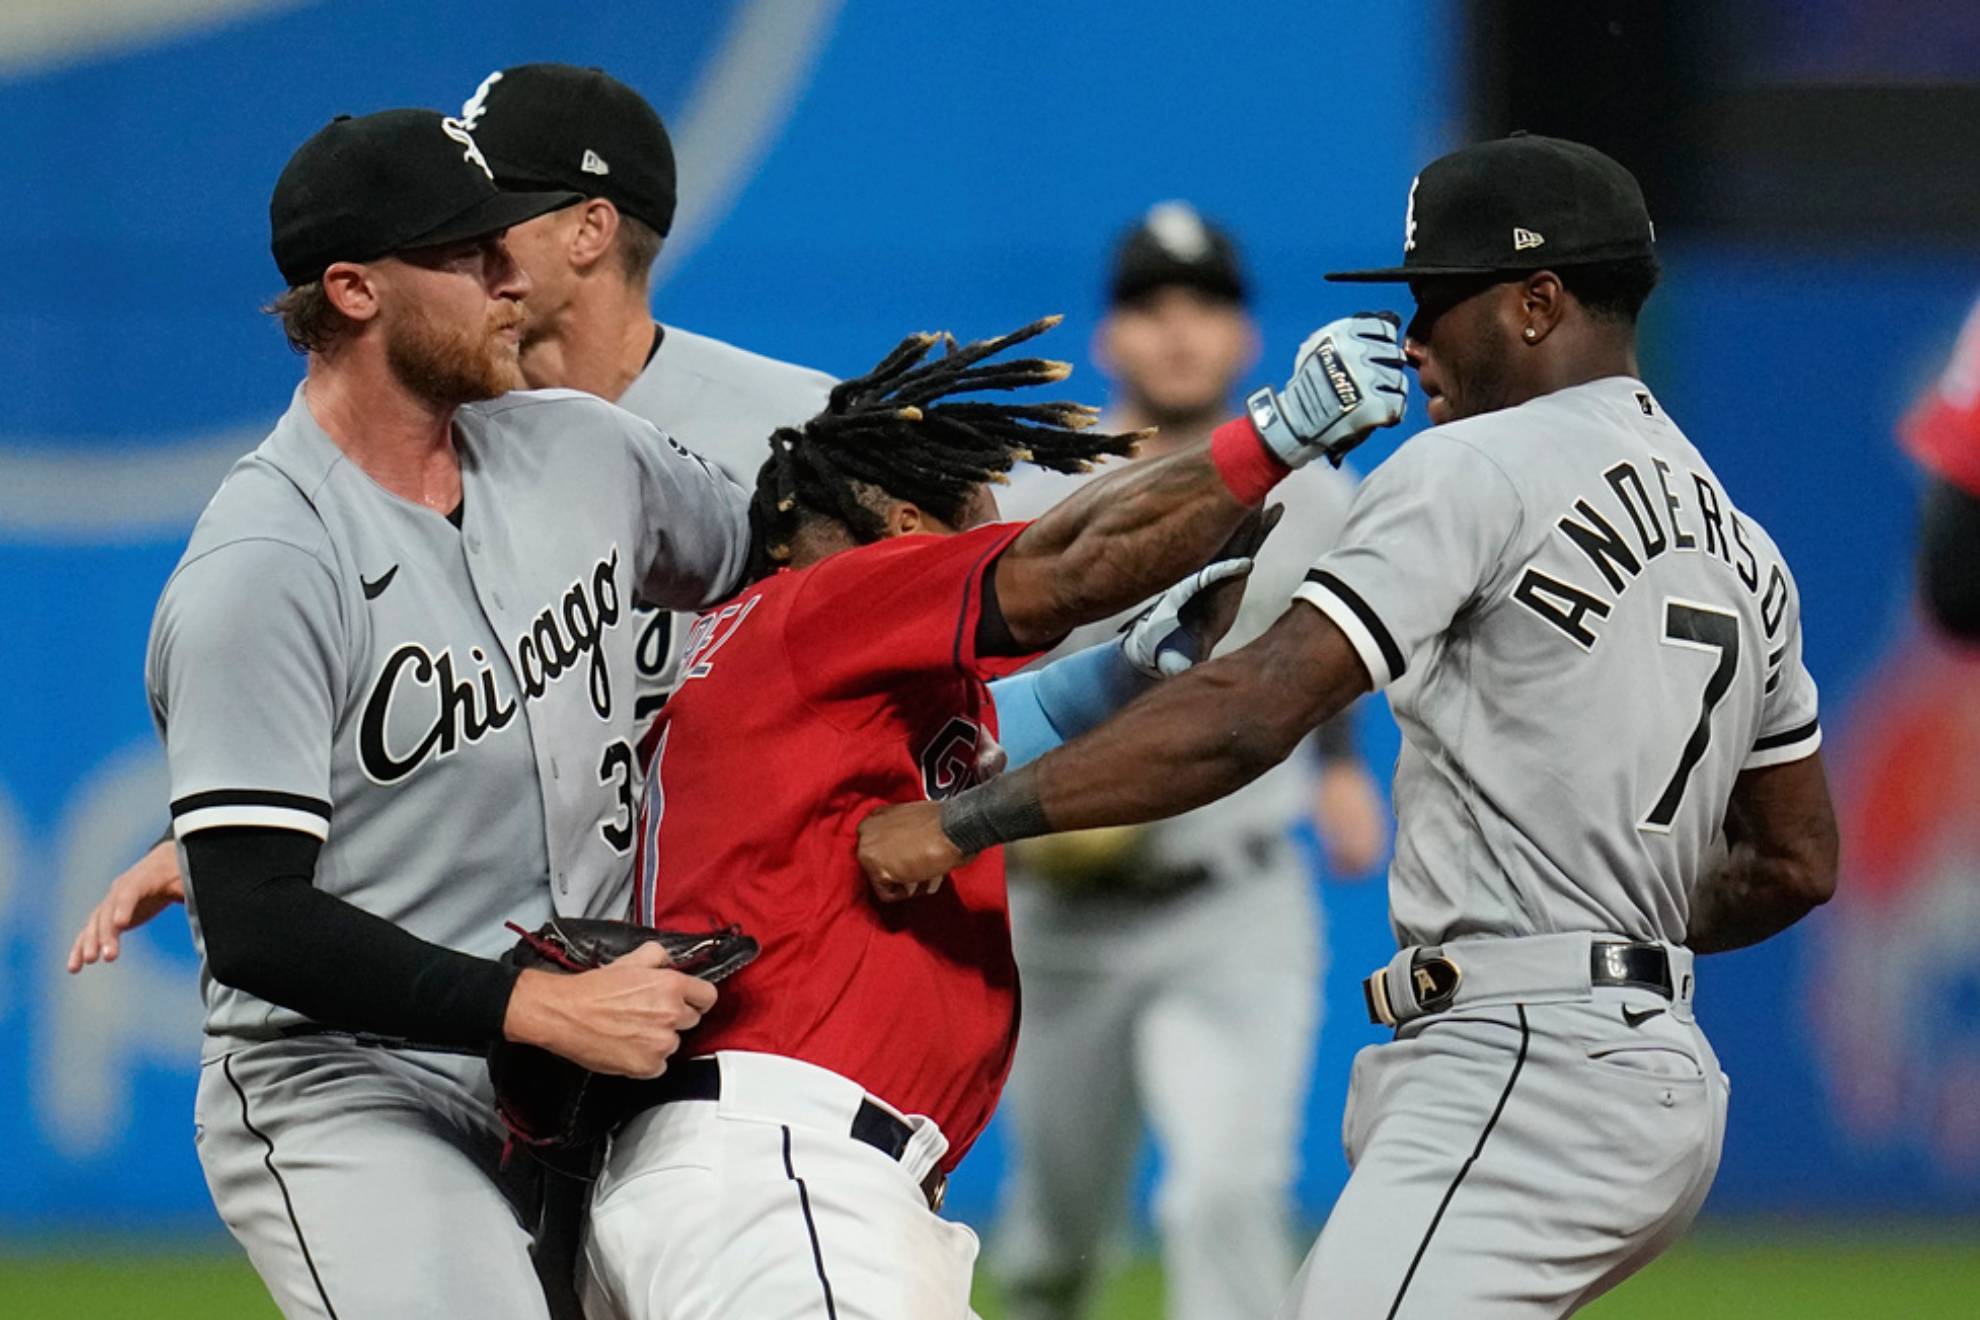 Cleveland Guardians' Jose Ramirez, center, and Chicago White Sox's Tim Anderson (7) exchange punches in the sixth inning of a baseball game